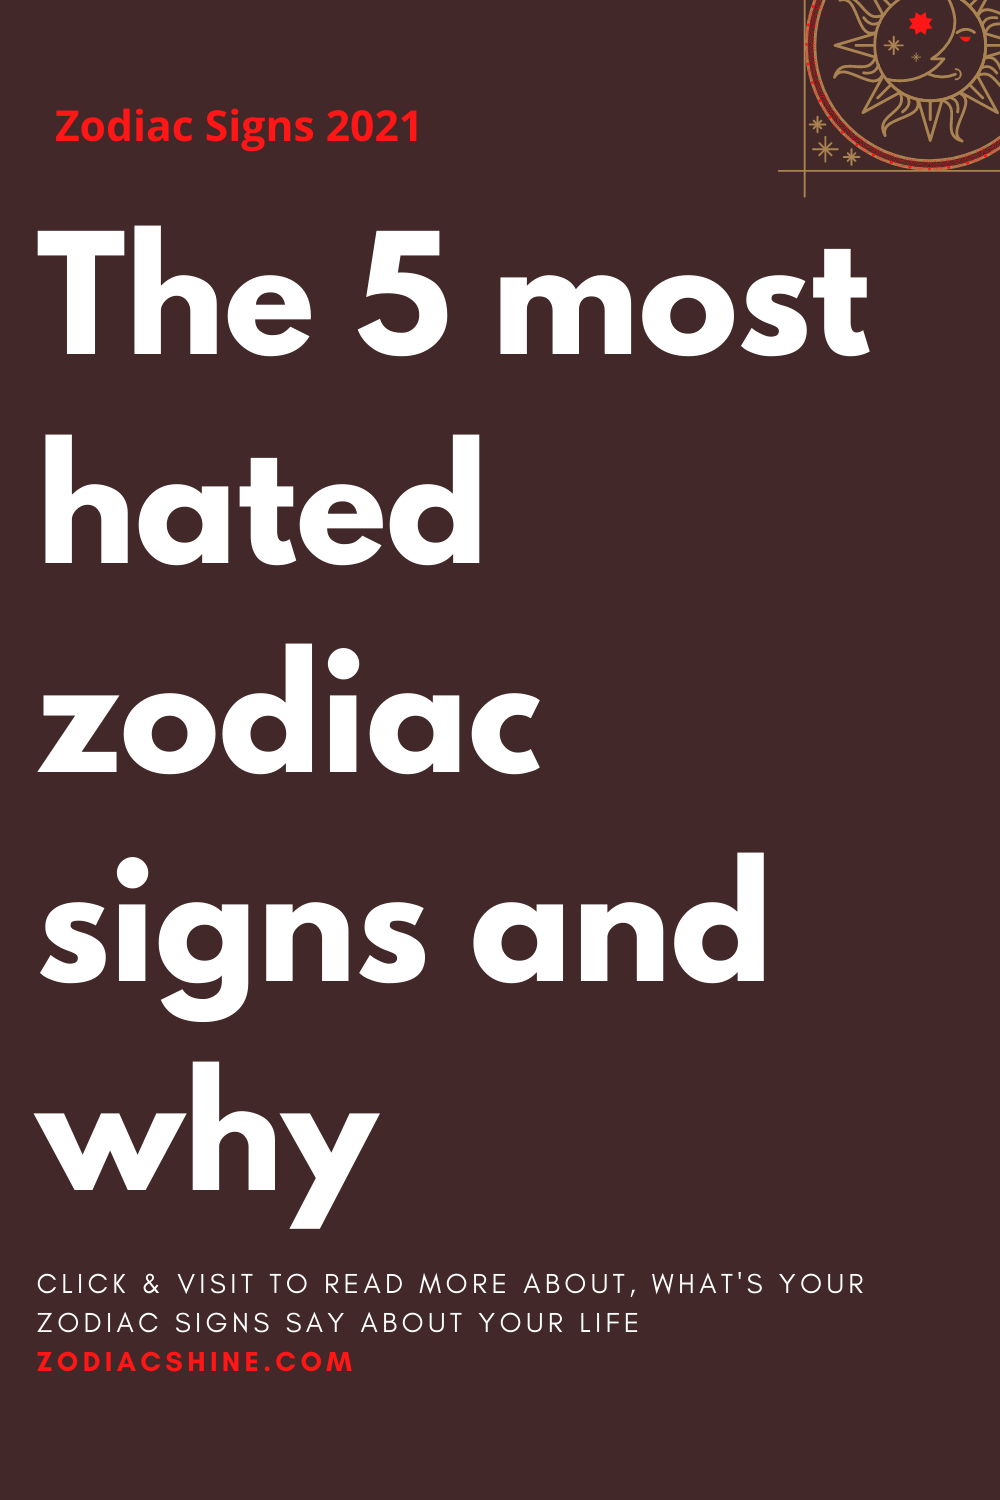 The 5 most hated zodiac signs and why